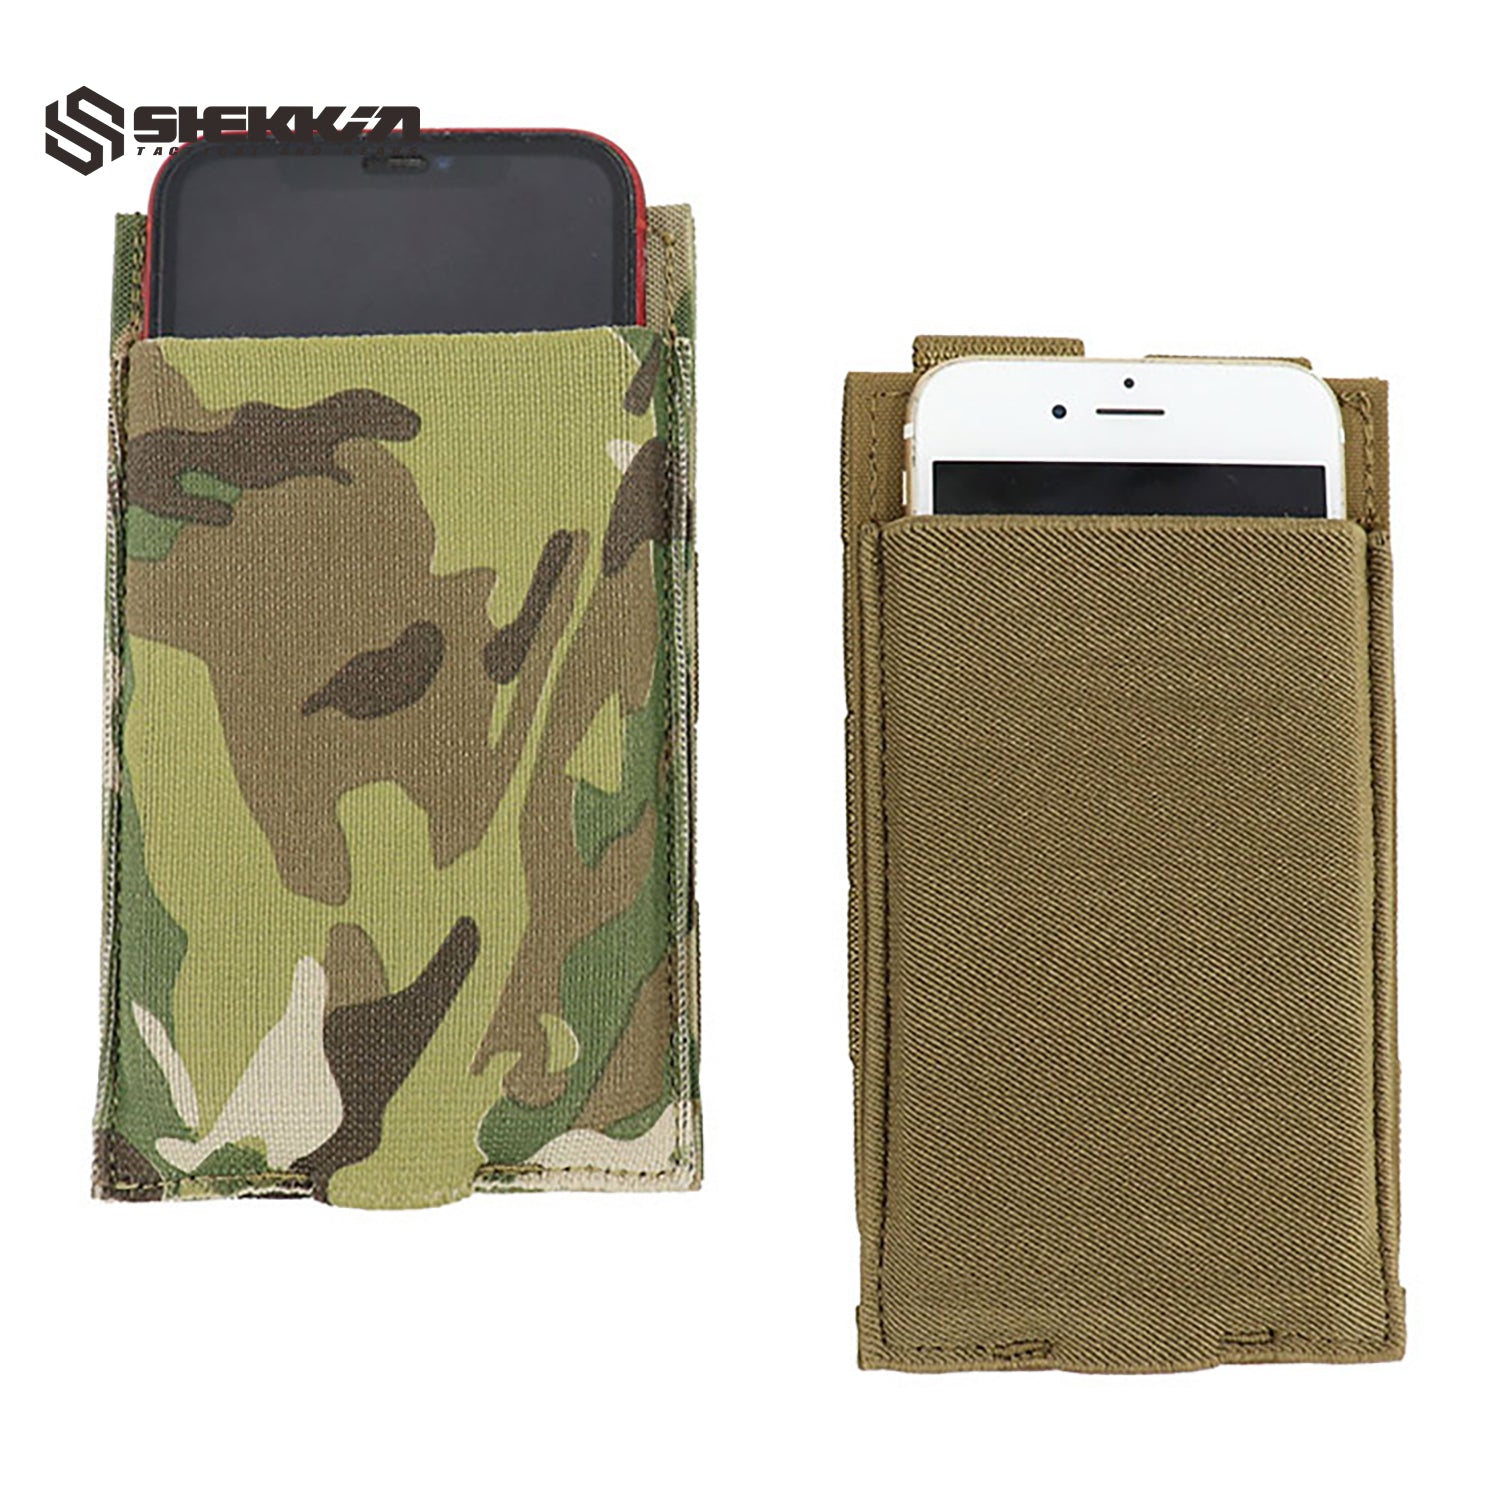 Elastic mag pouch